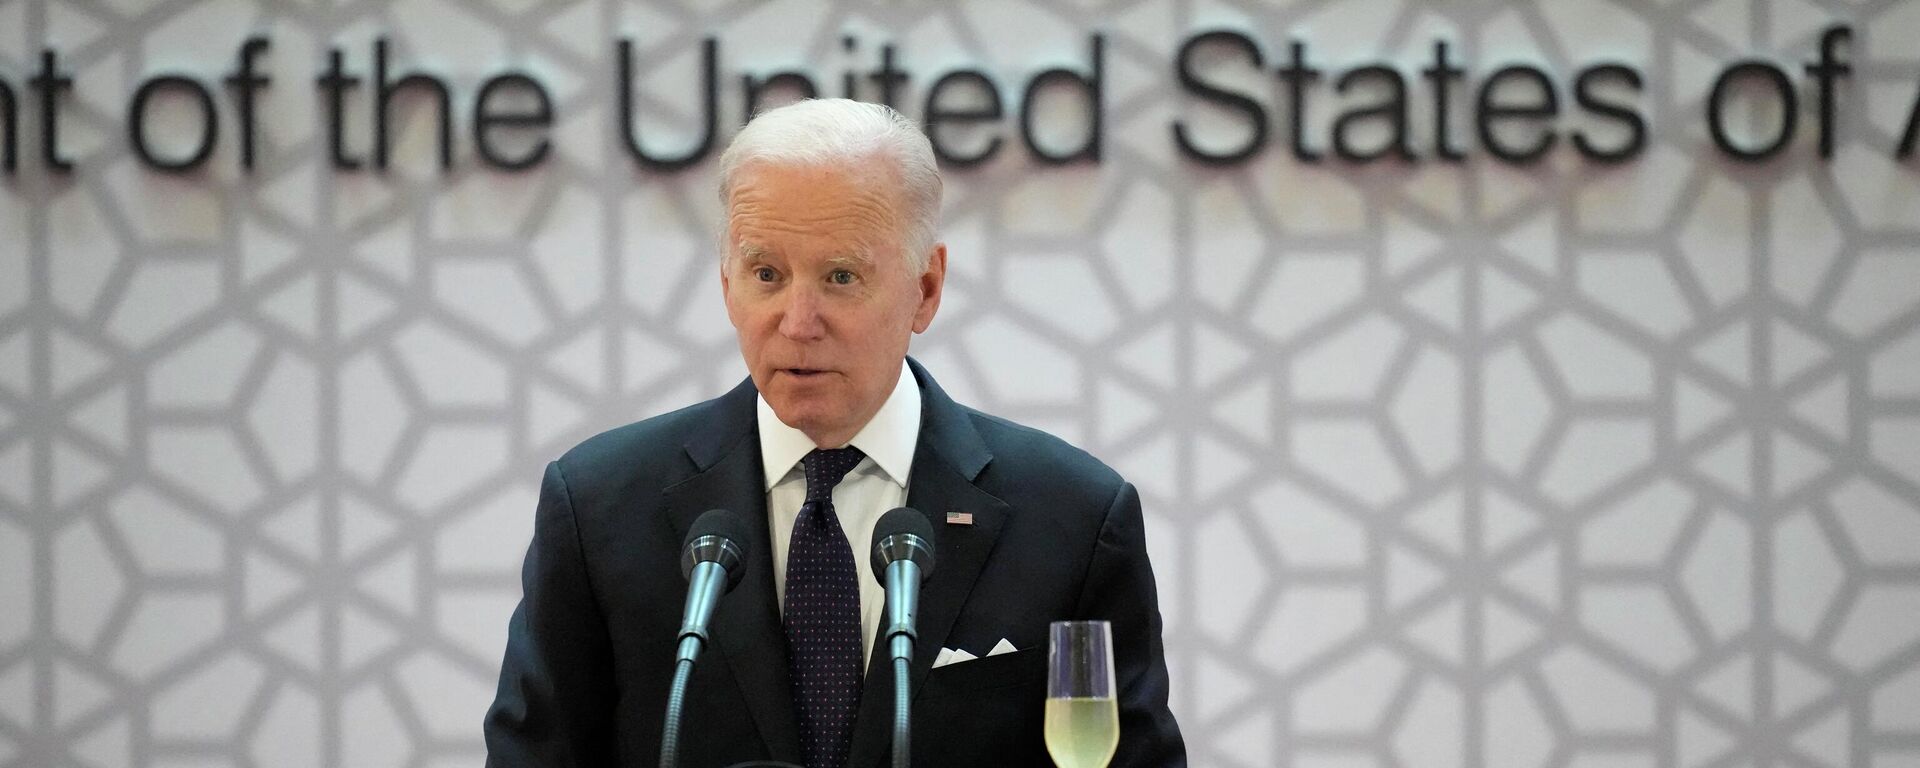 US President Joe Biden delivers a speech before the state dinner with South Korean President Yoon Suk Yeol at the National Museum of Korea in Seoul on May 21, 2022. - Sputnik International, 1920, 21.05.2022